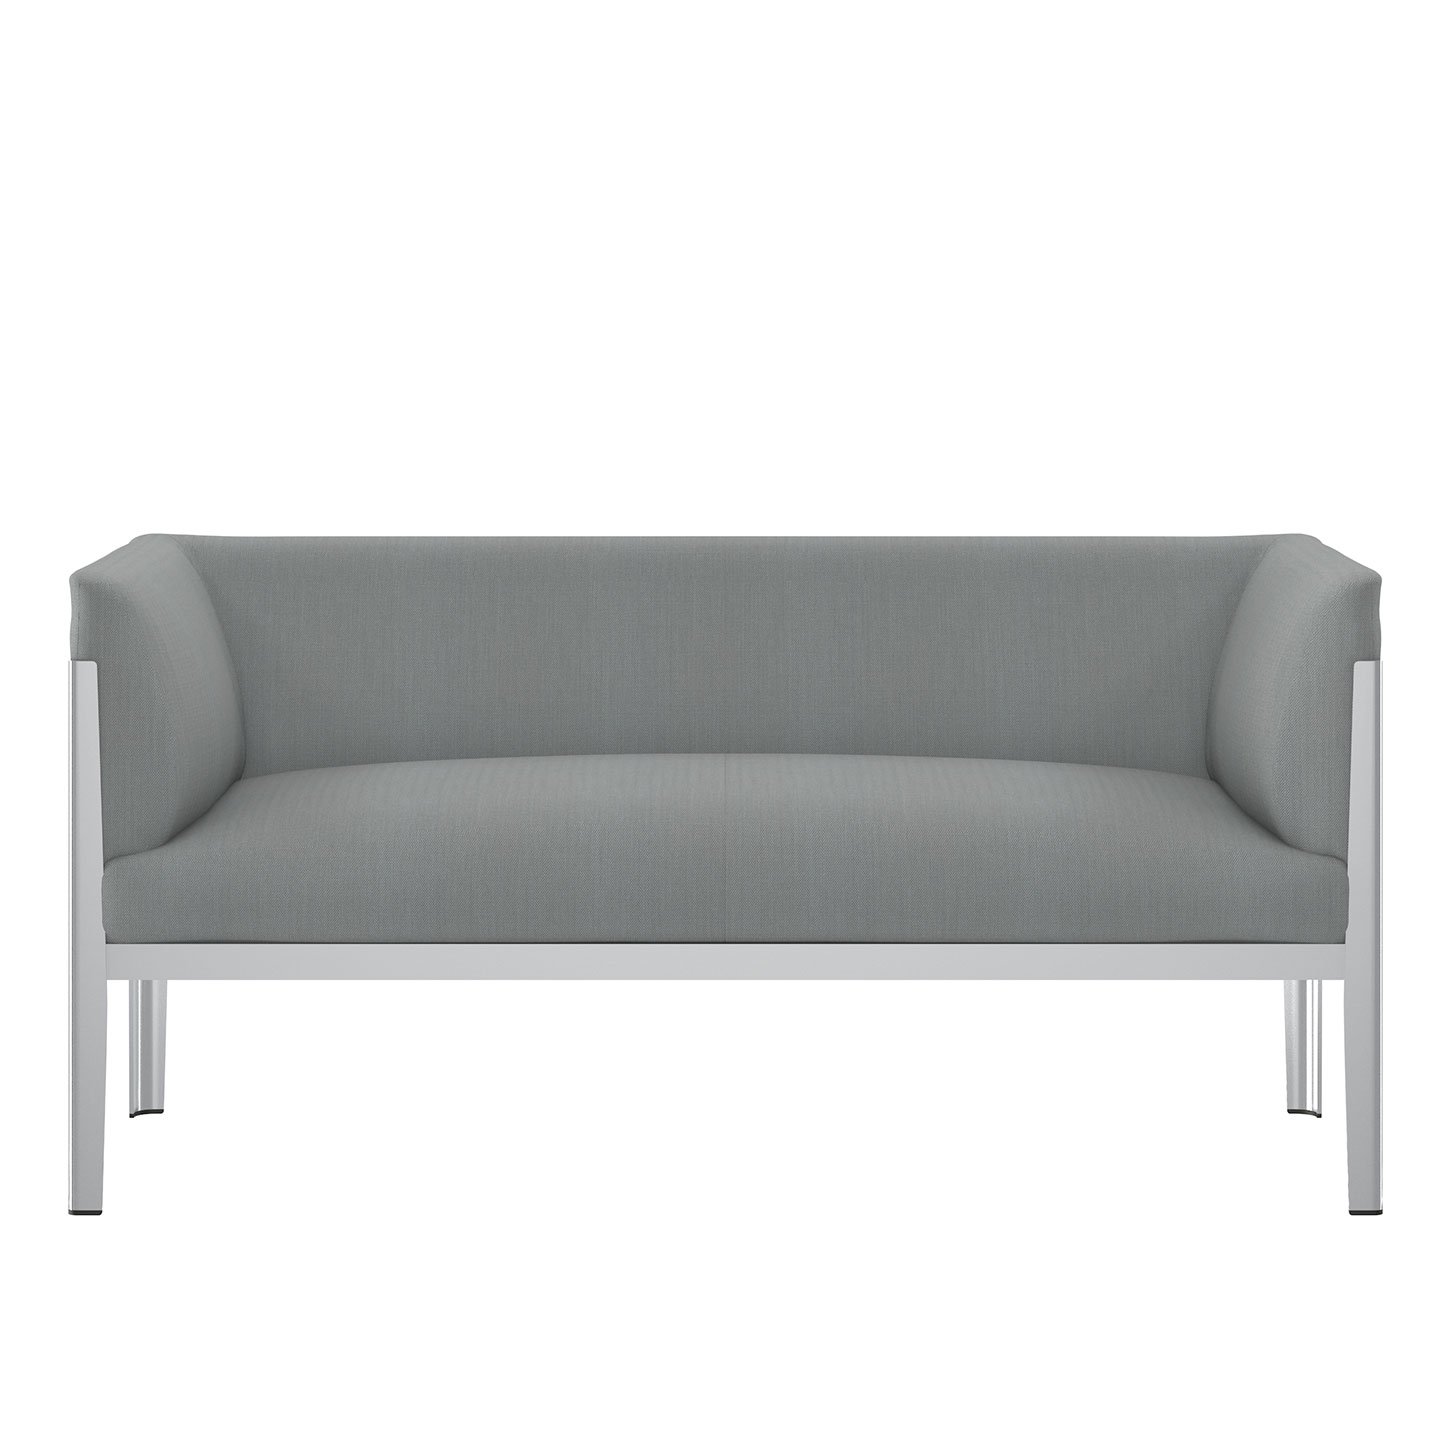 Haworth Cotone Slim lounge in grey color with metal legs in front view